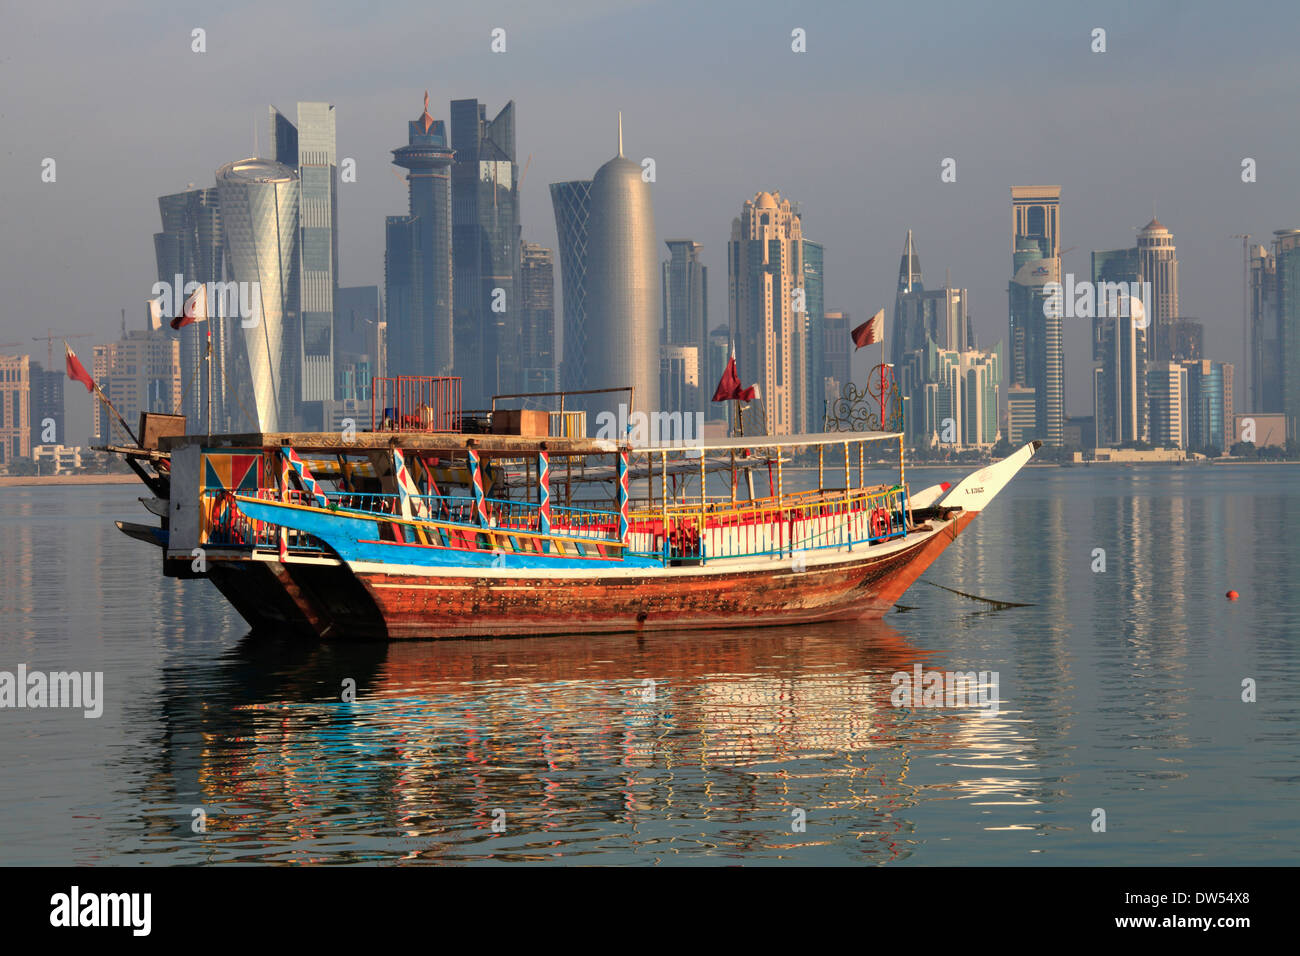 Qatar, Doha, skyline, West Bay, business district, dhow, traditional boat, Stock Photo